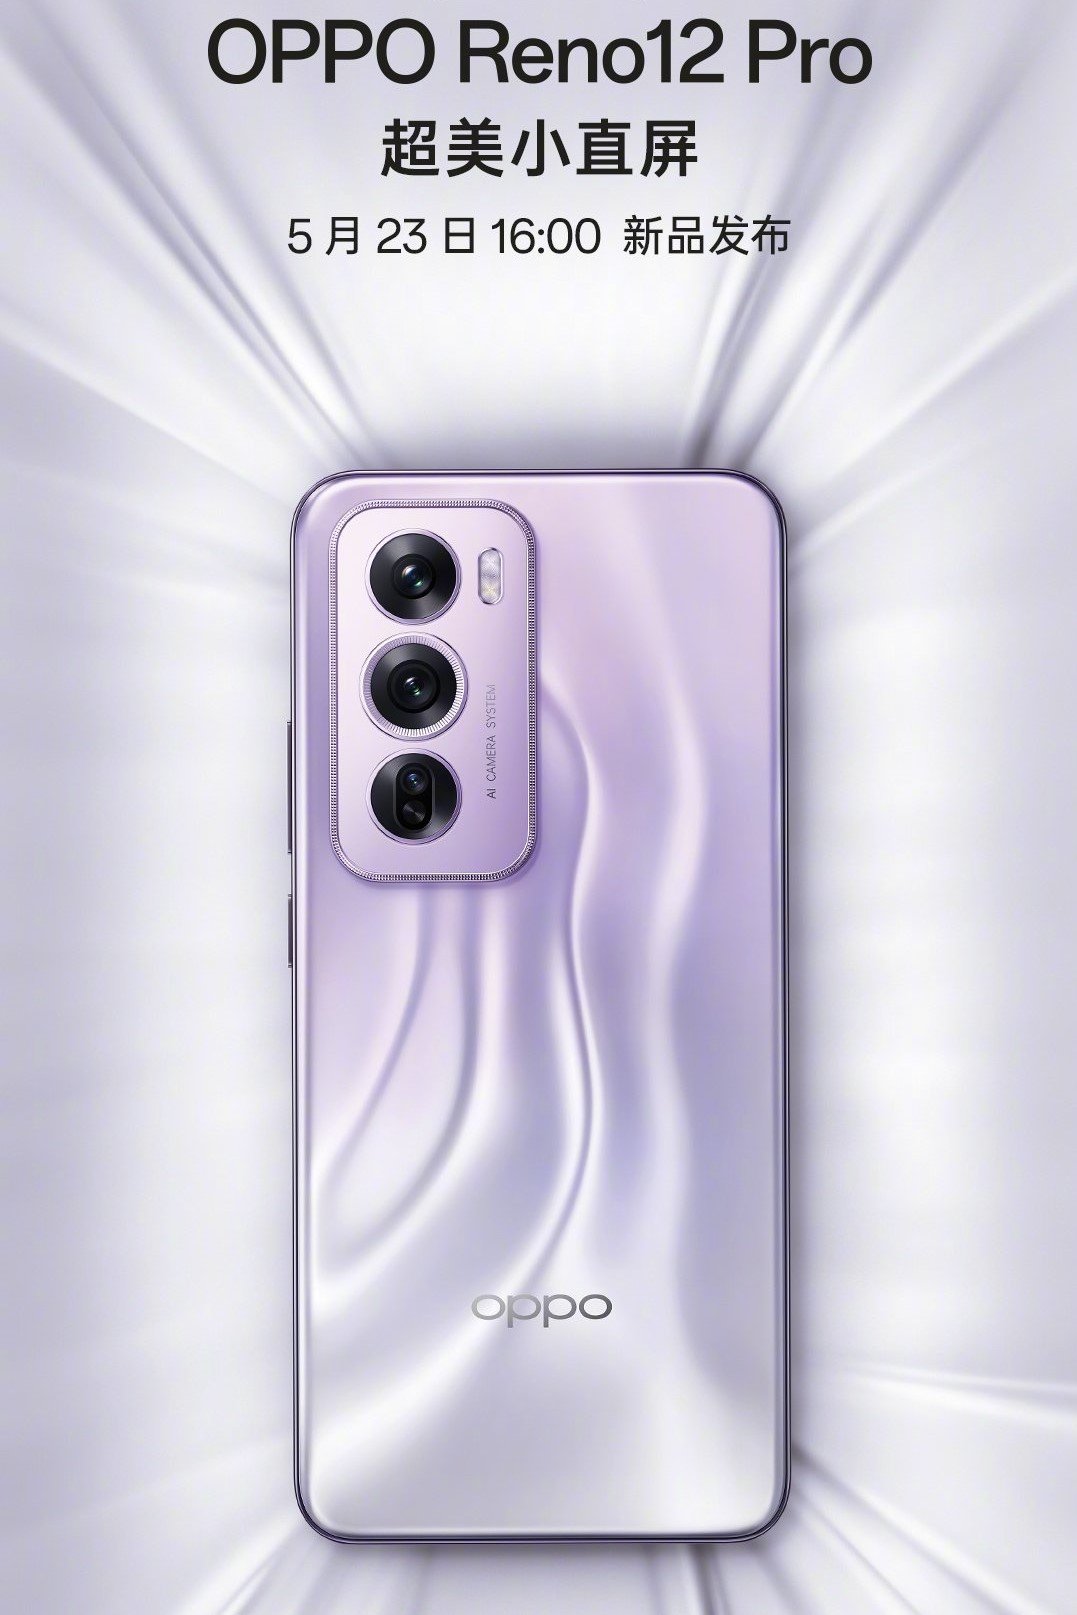 OPPO Reno 12, Reno 12 Pro Design And Color Options Revealed Officially - News - News